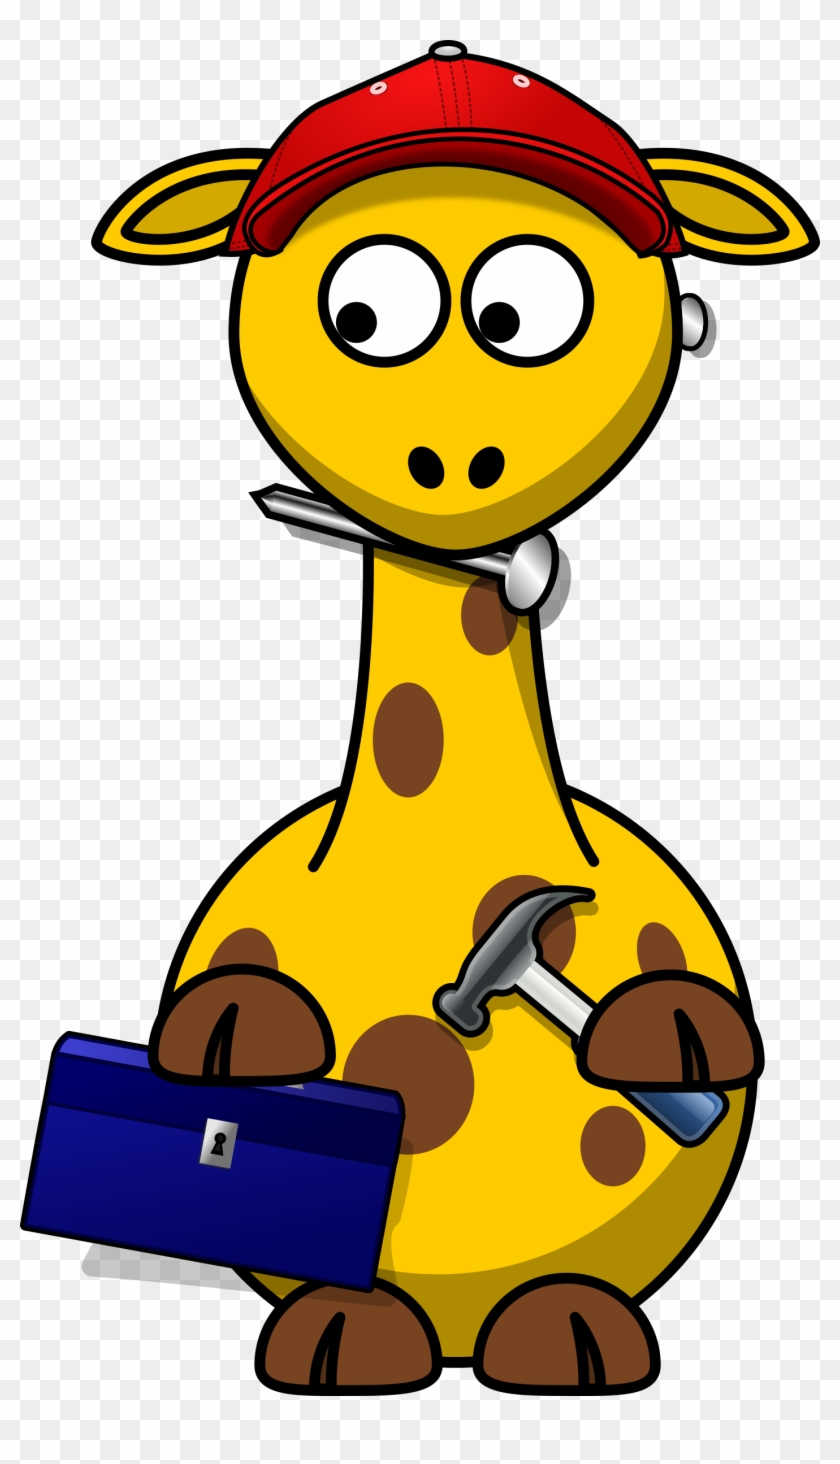 This Free Icons Png Design Of Giraffe Secret Agent - Cartoon Animals Clipart Transparent Png #2258368